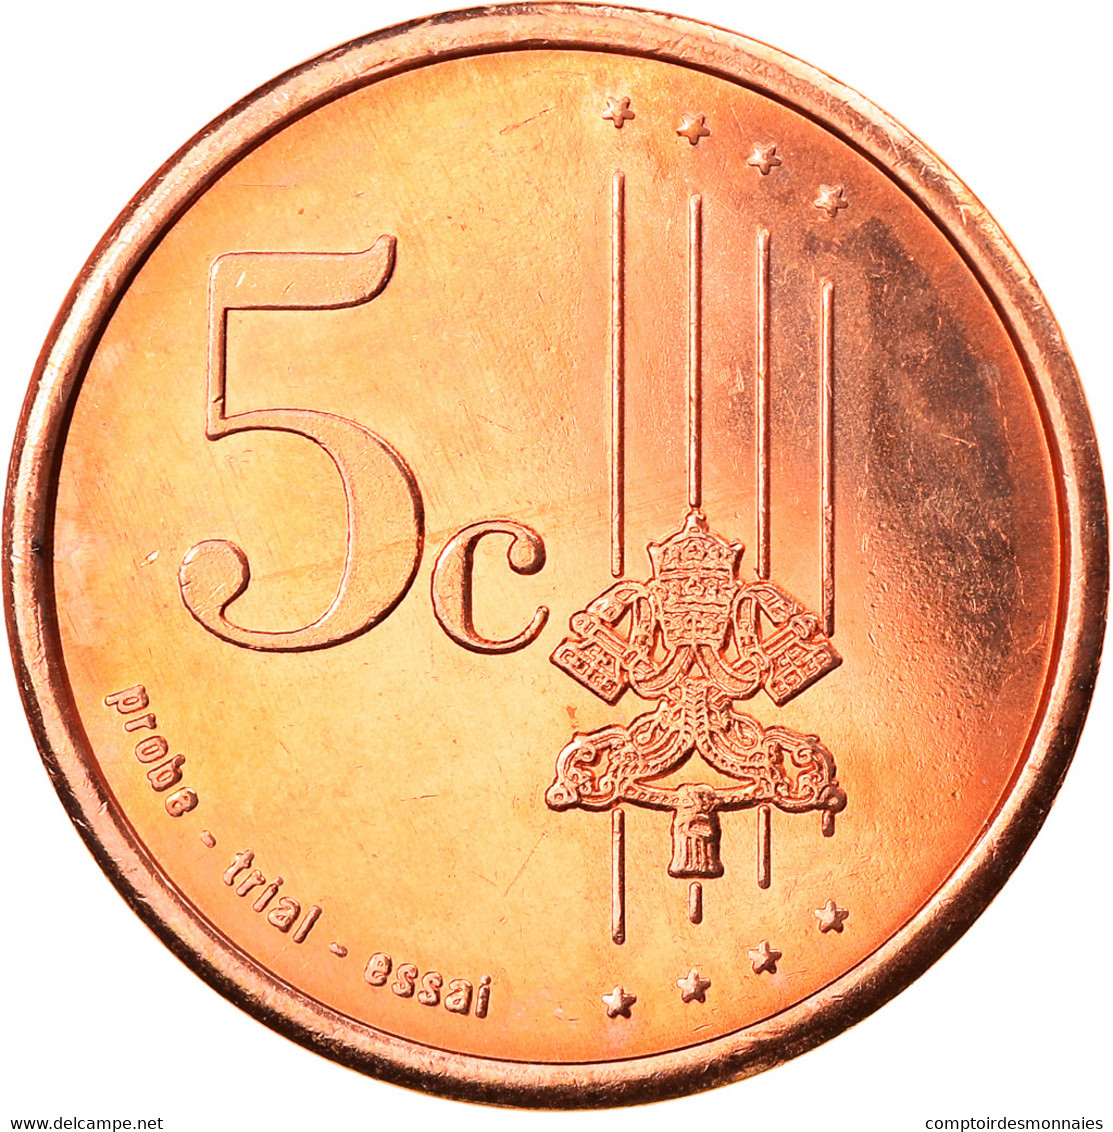 Vatican, 5 Euro Cent, 2007, Unofficial Private Coin, FDC, Copper Plated Steel - Pruebas Privadas